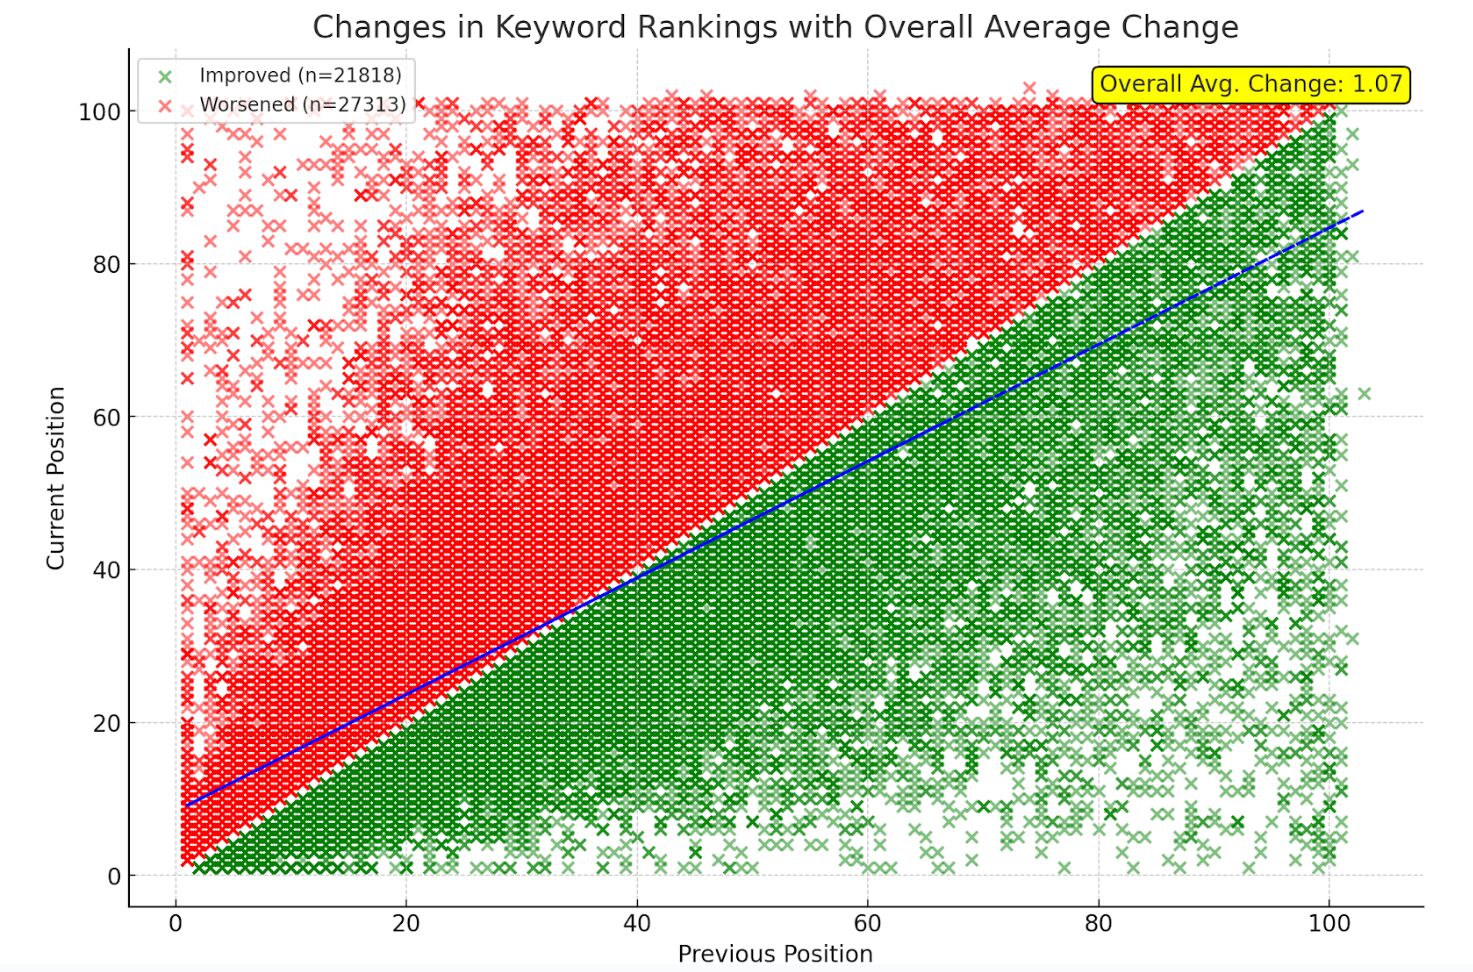 Changes in keyword rankings shown in a scatterplot with winners/losers separated